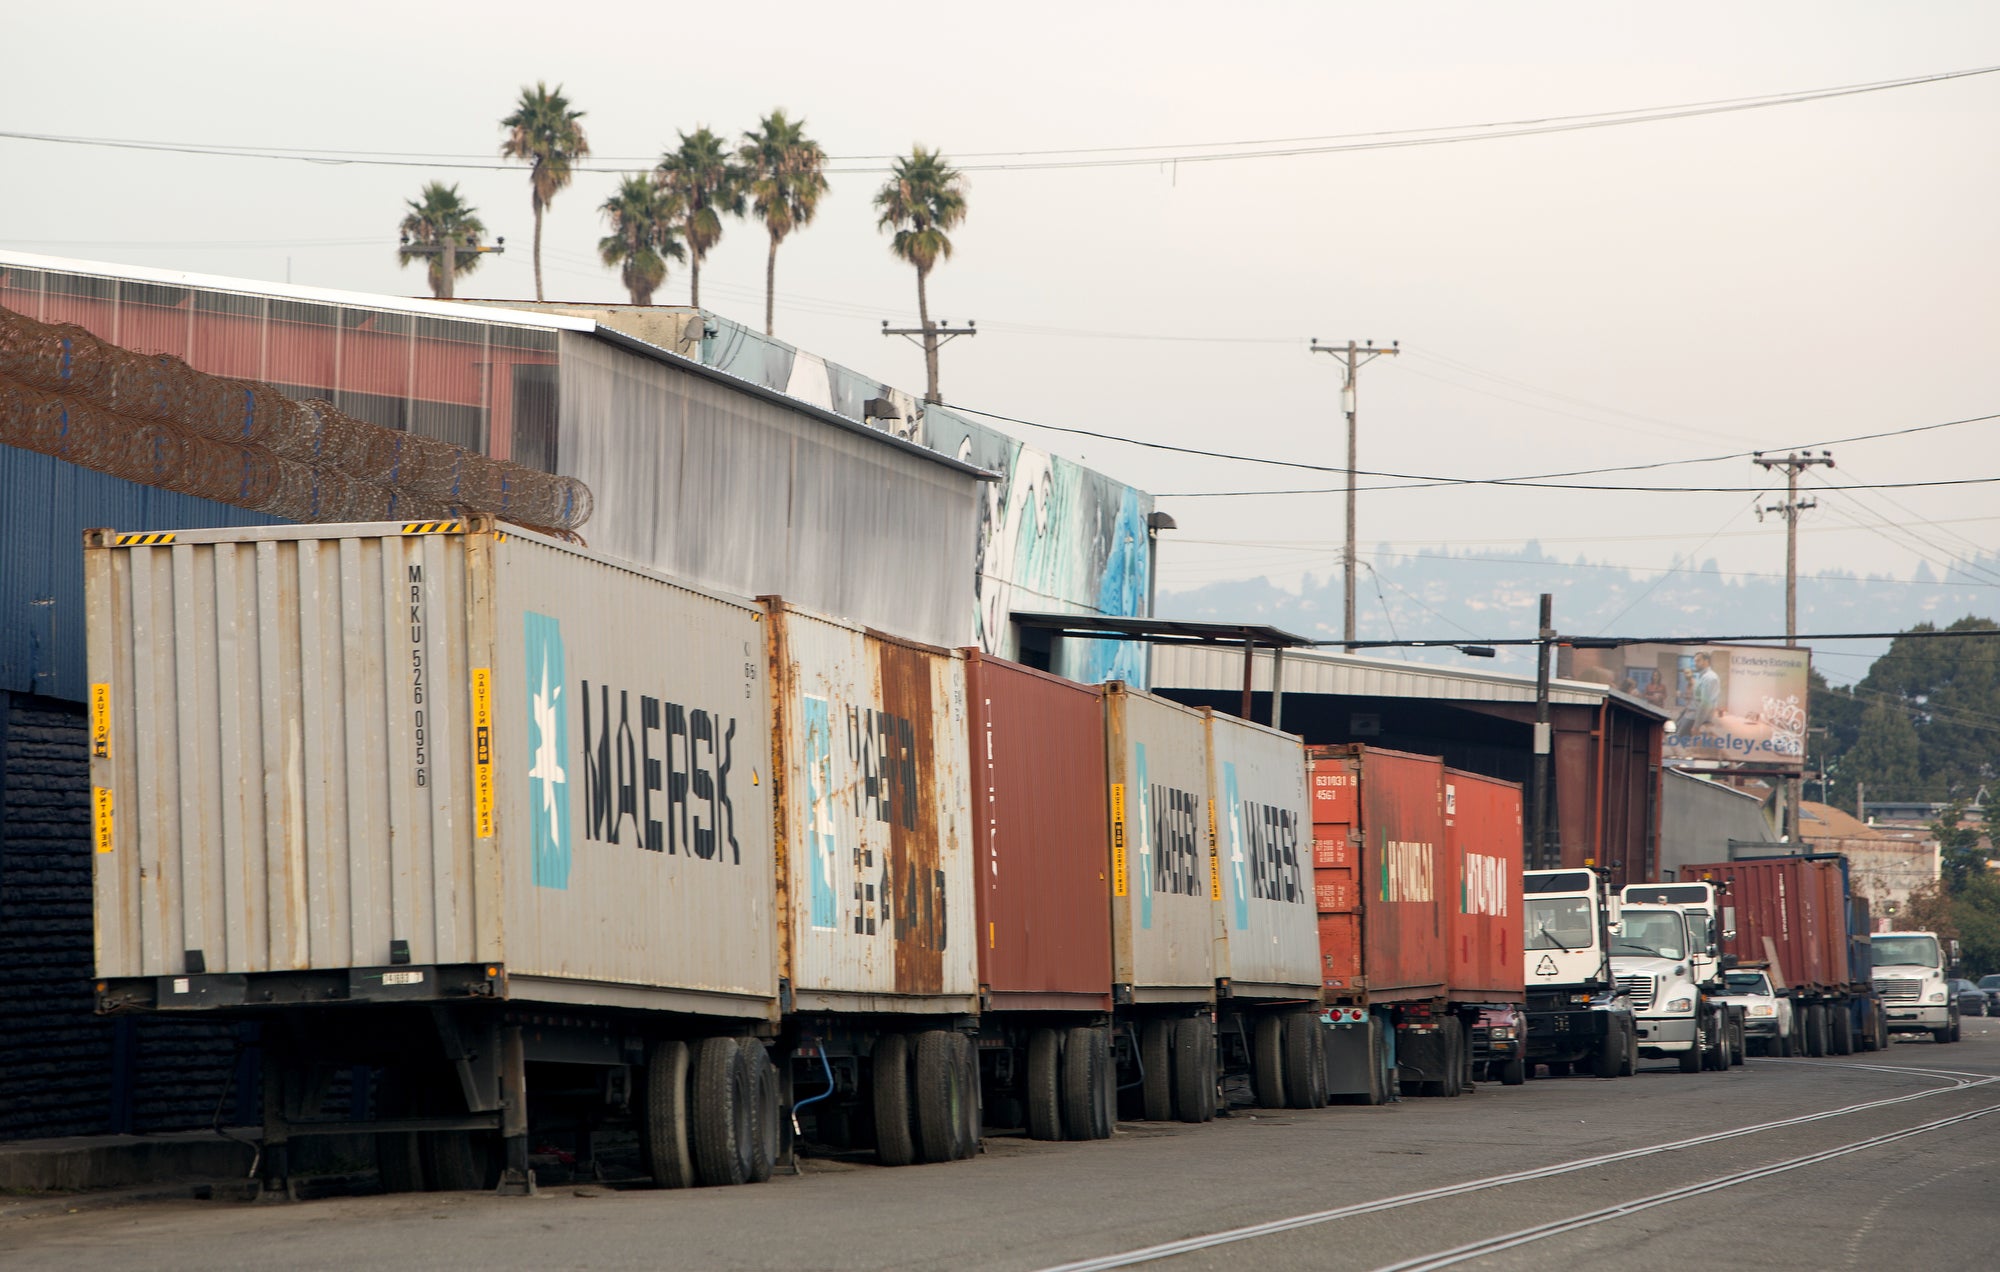 Shipping containers on trailers lined up on a West Oakland street.